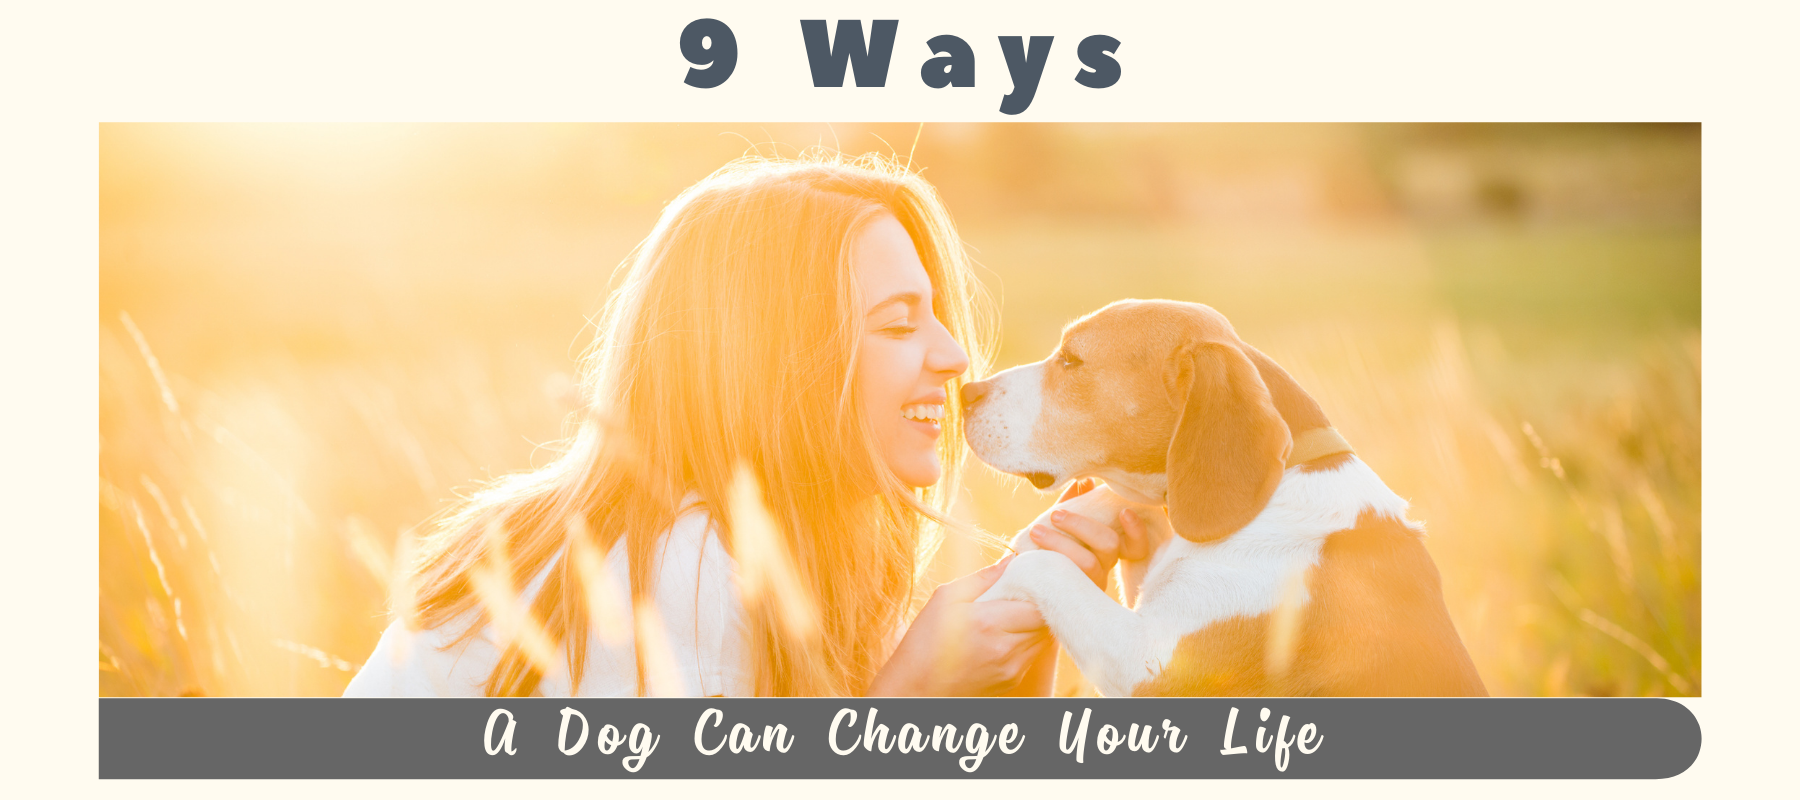 9 Ways a Dog Can Change Your Life